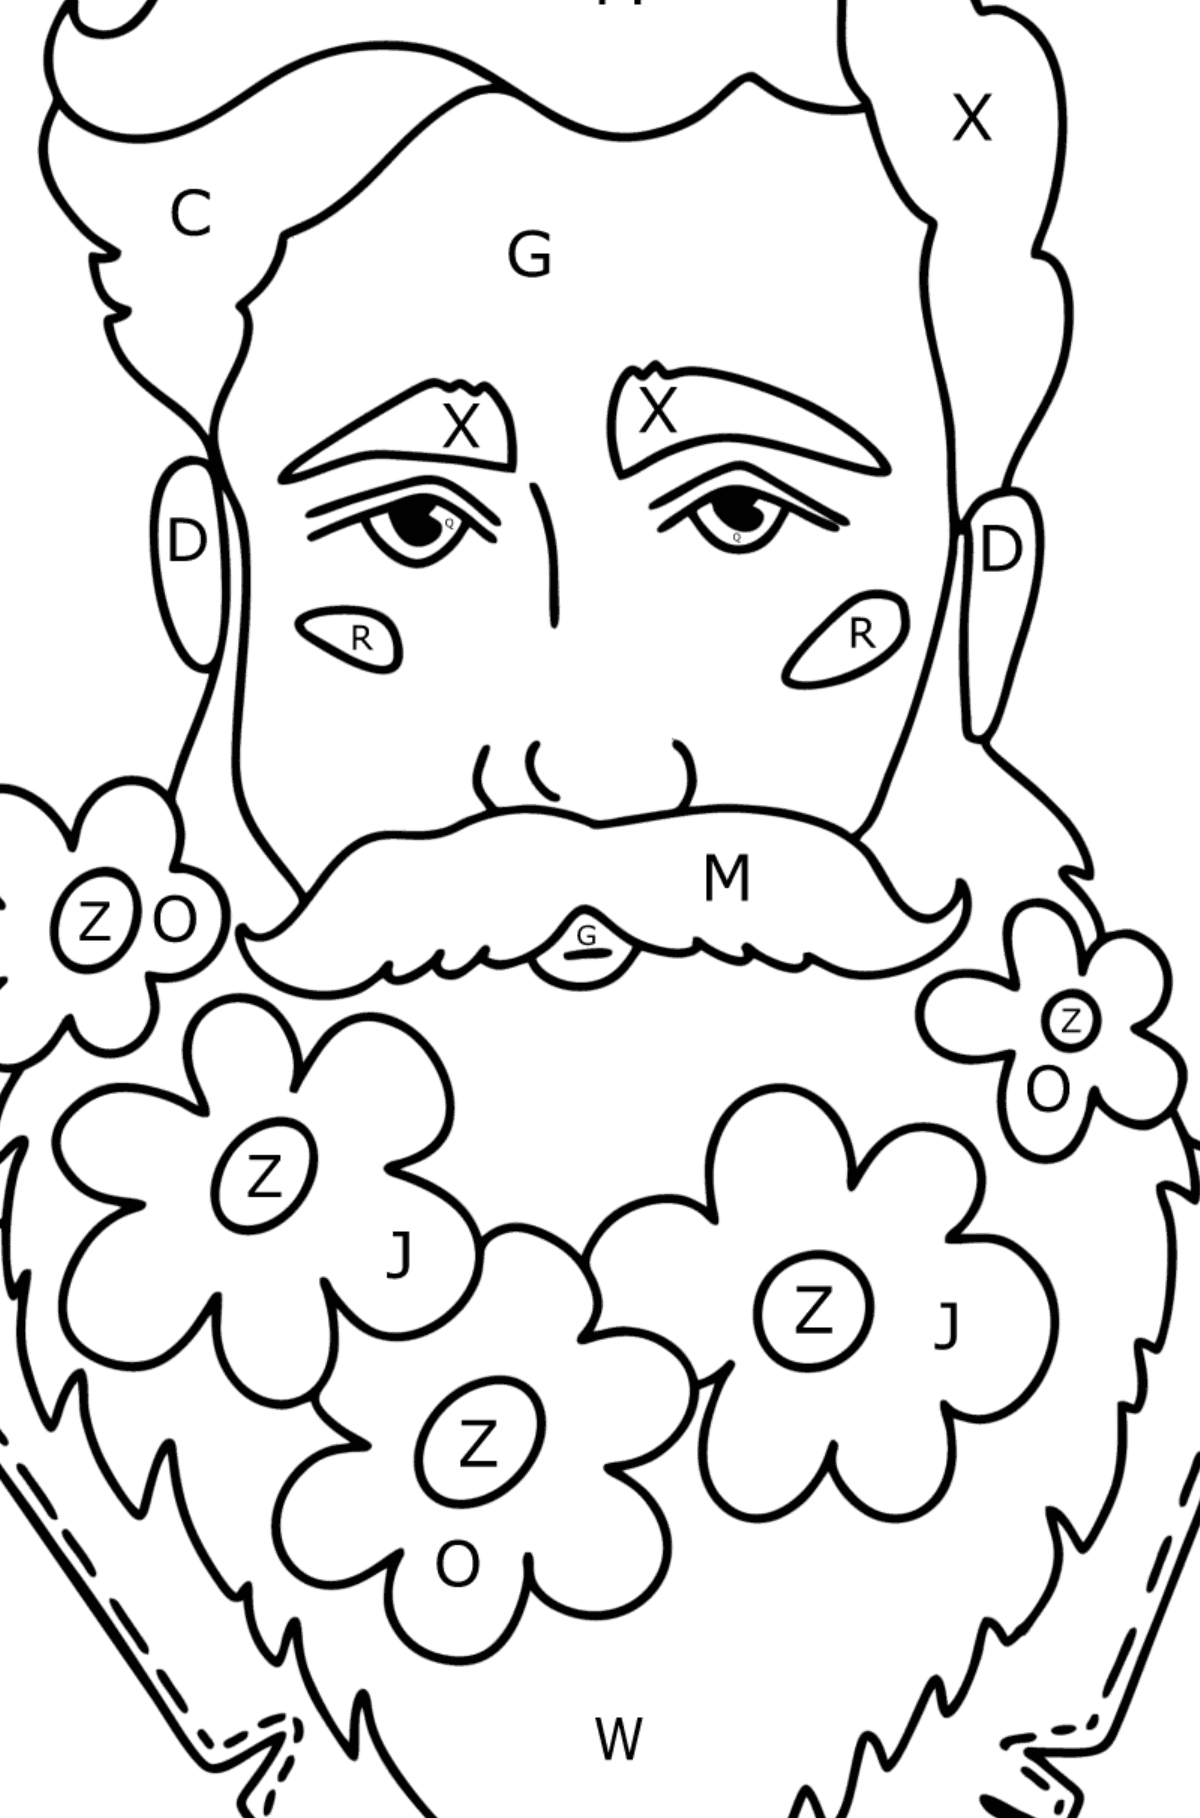 Young man with a beard сoloring page - Coloring by Letters for Kids